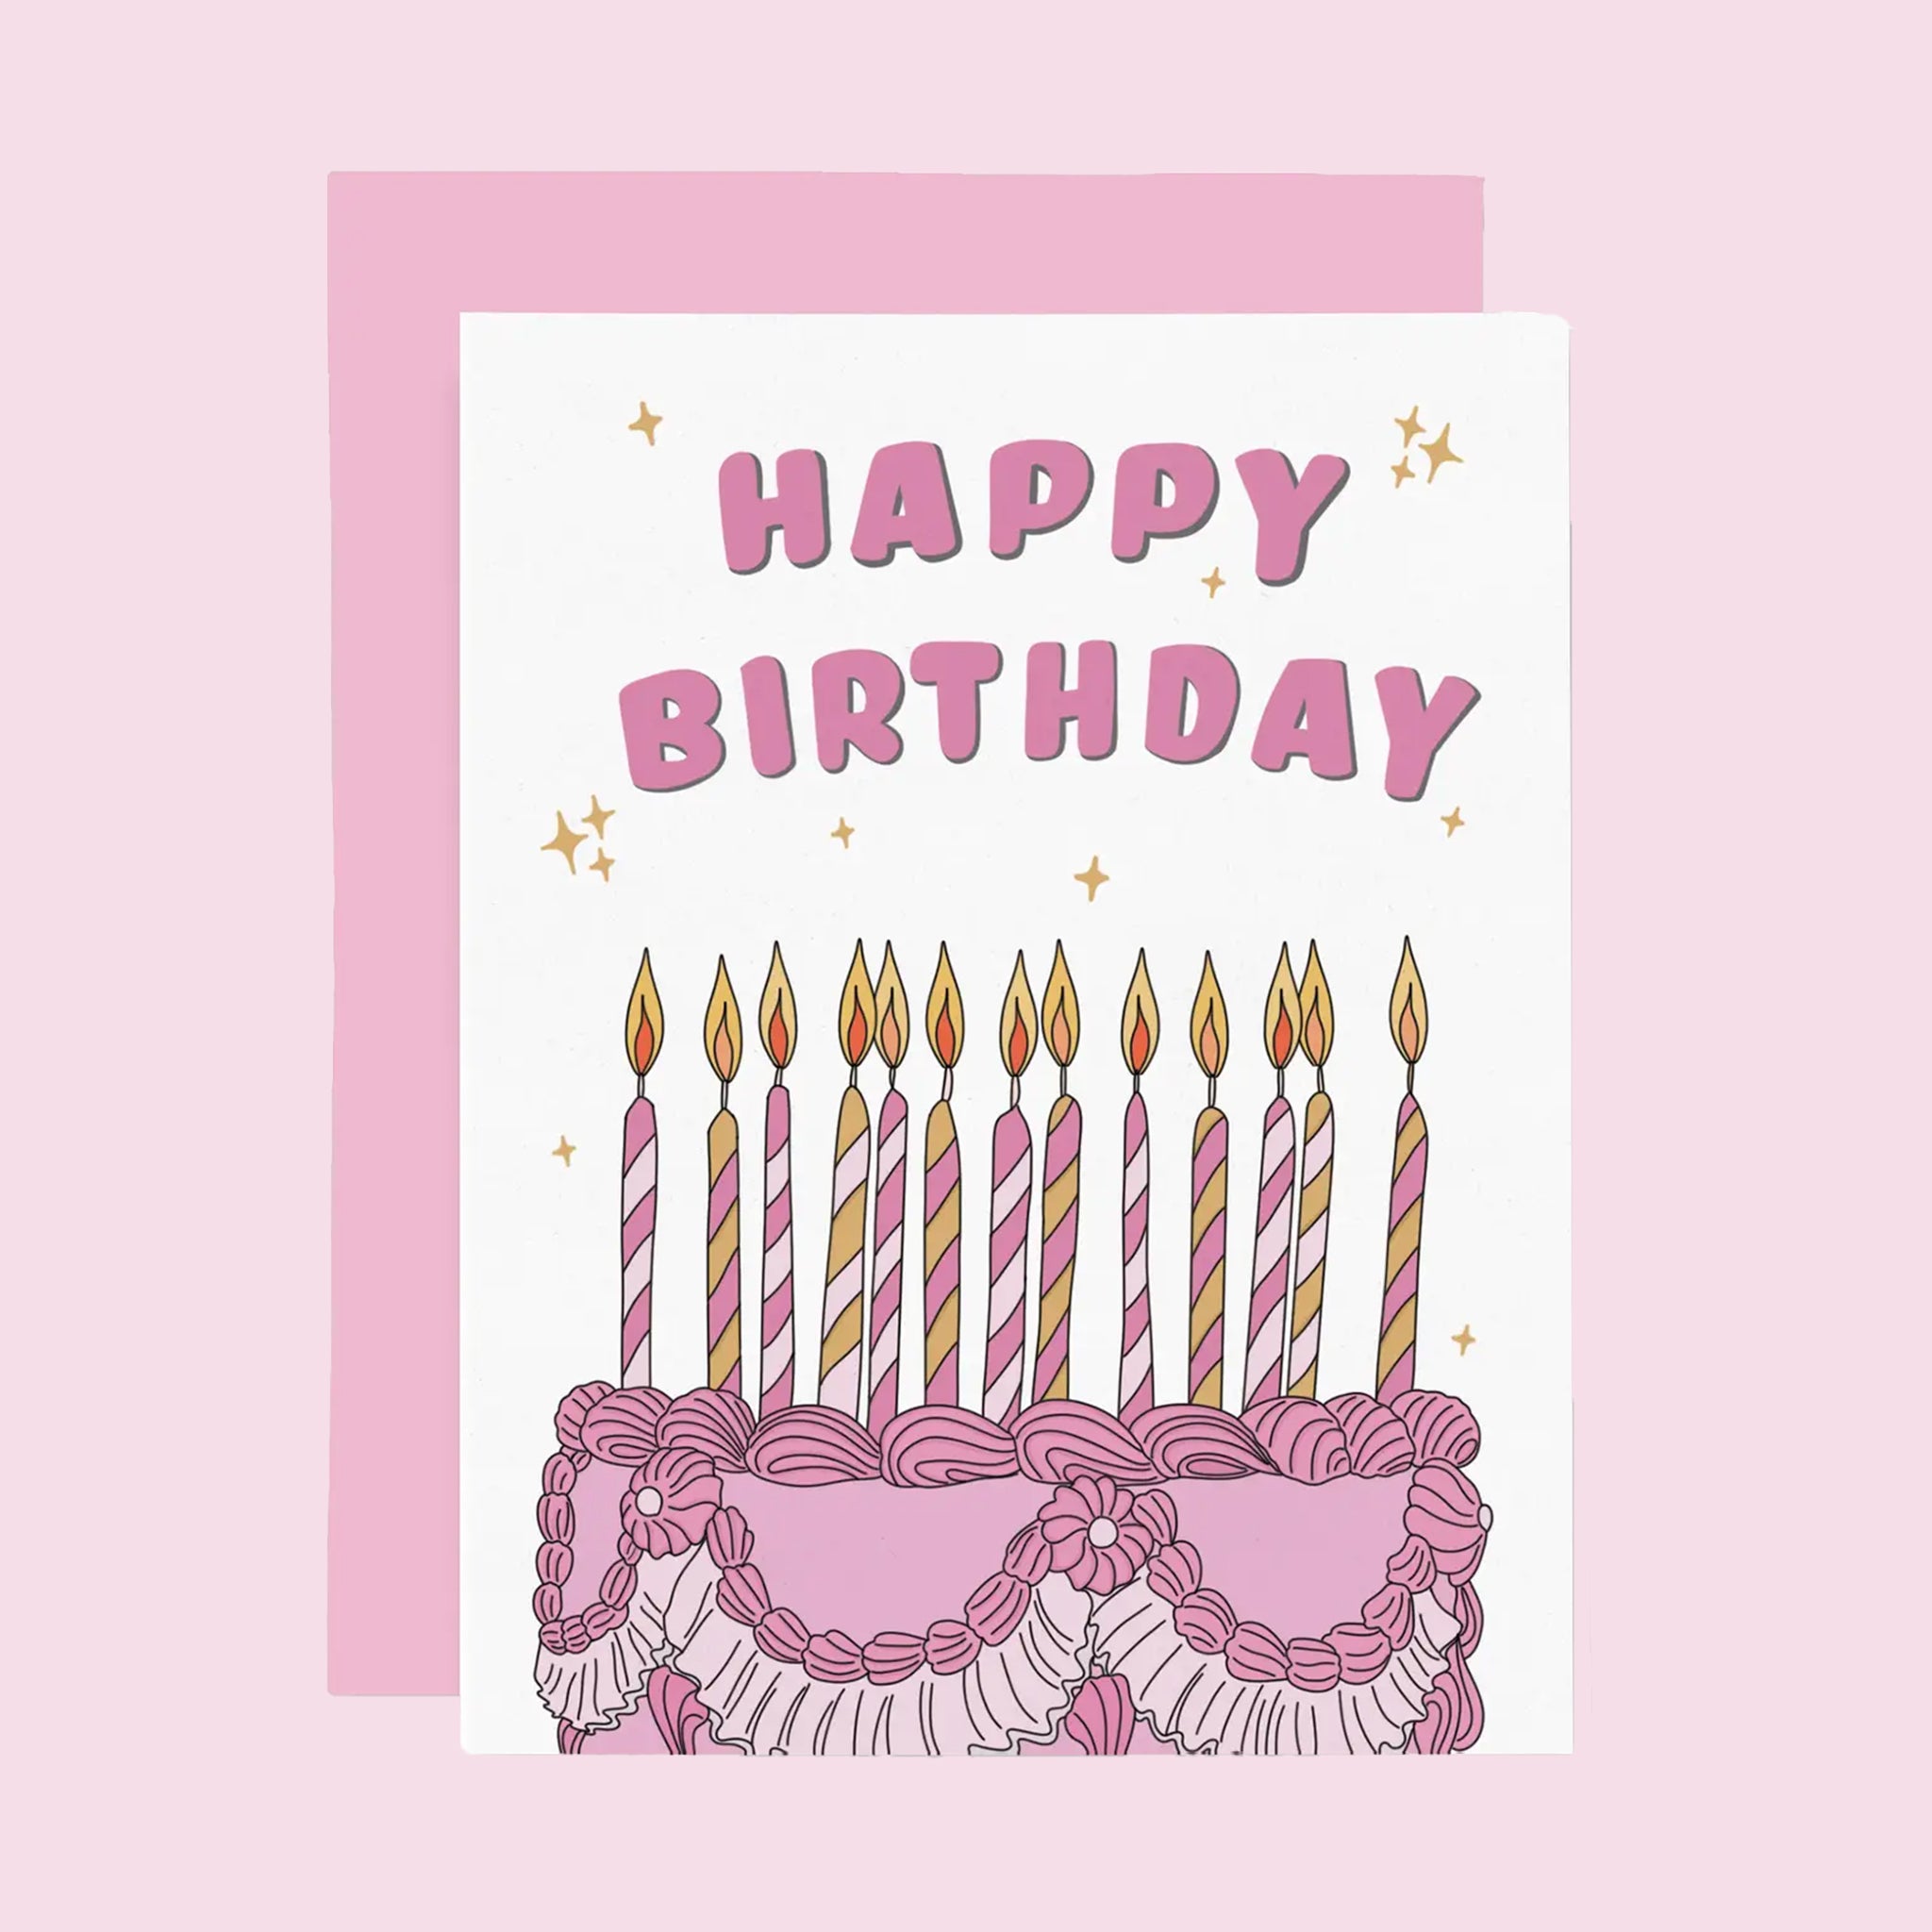 A white birthday card with a graphic of a birthday cake with candles and text that reads, "Happy Birthday".  